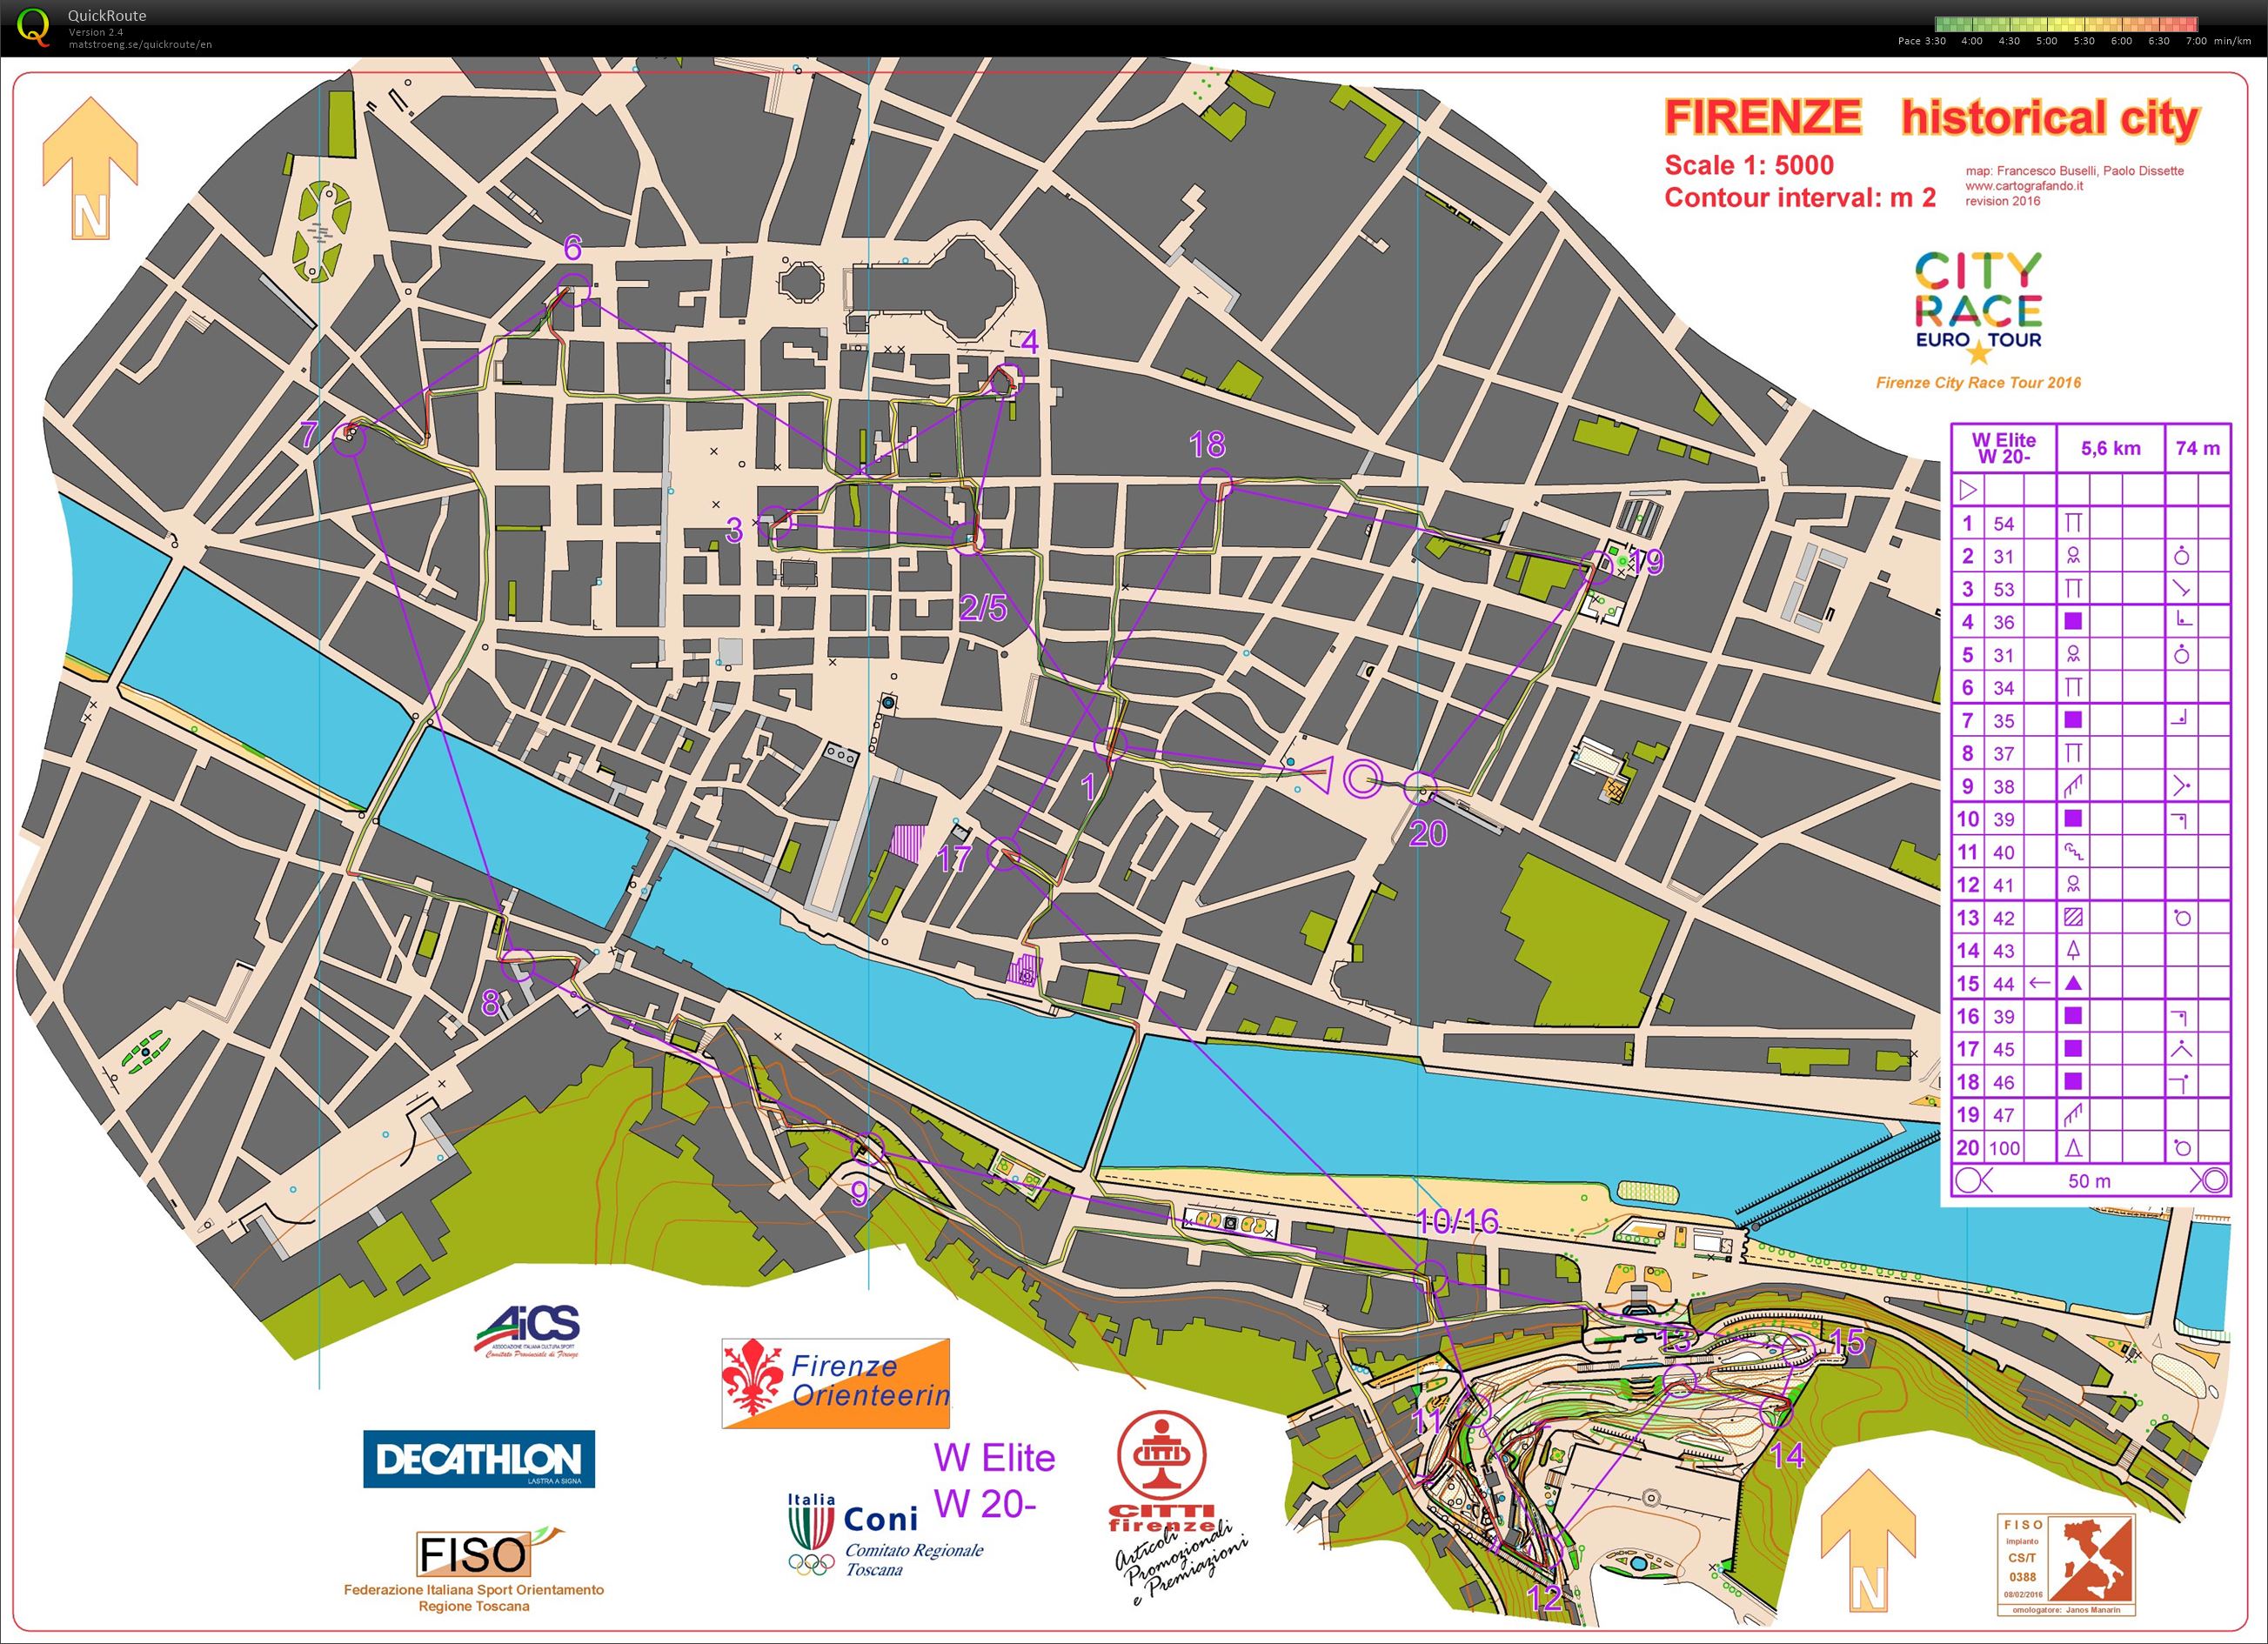 Florence City Race Tour 2016 Day 2 (09/10/2016)